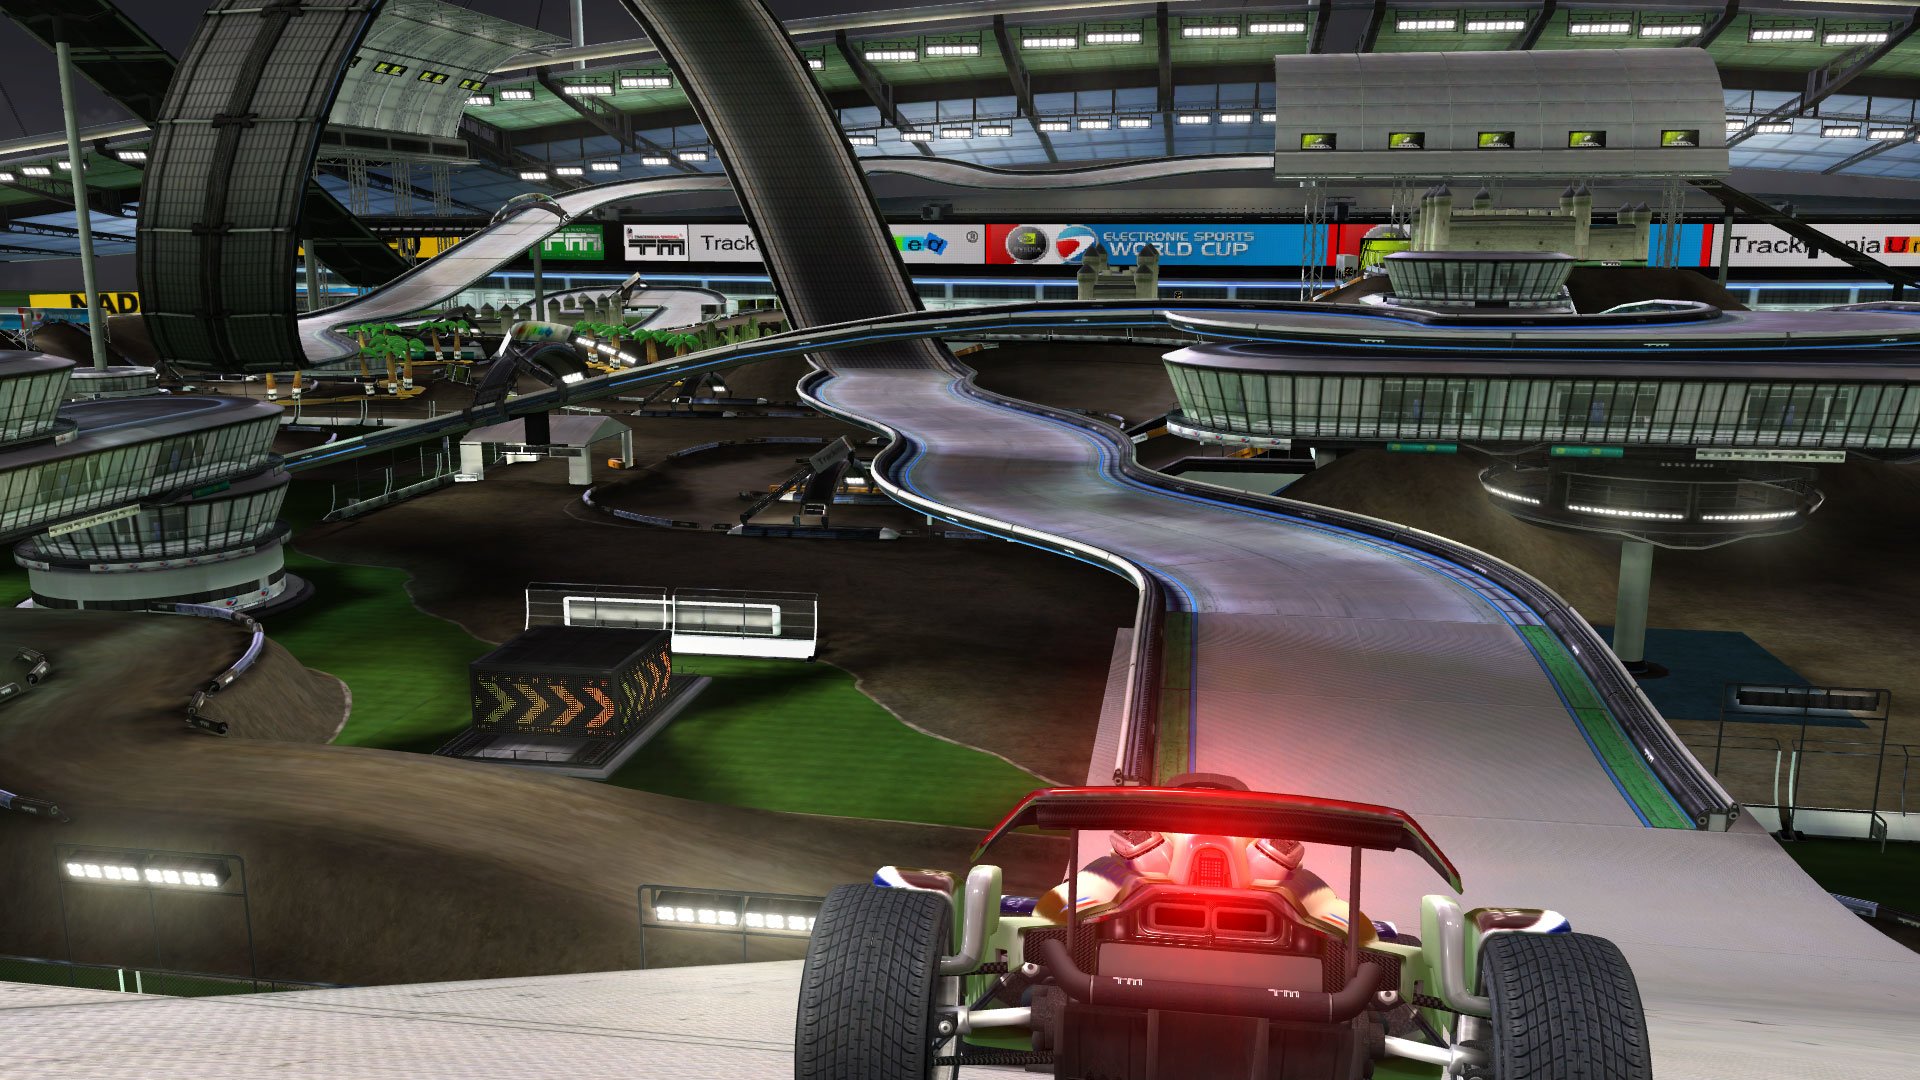 Trackmania Wallpapers